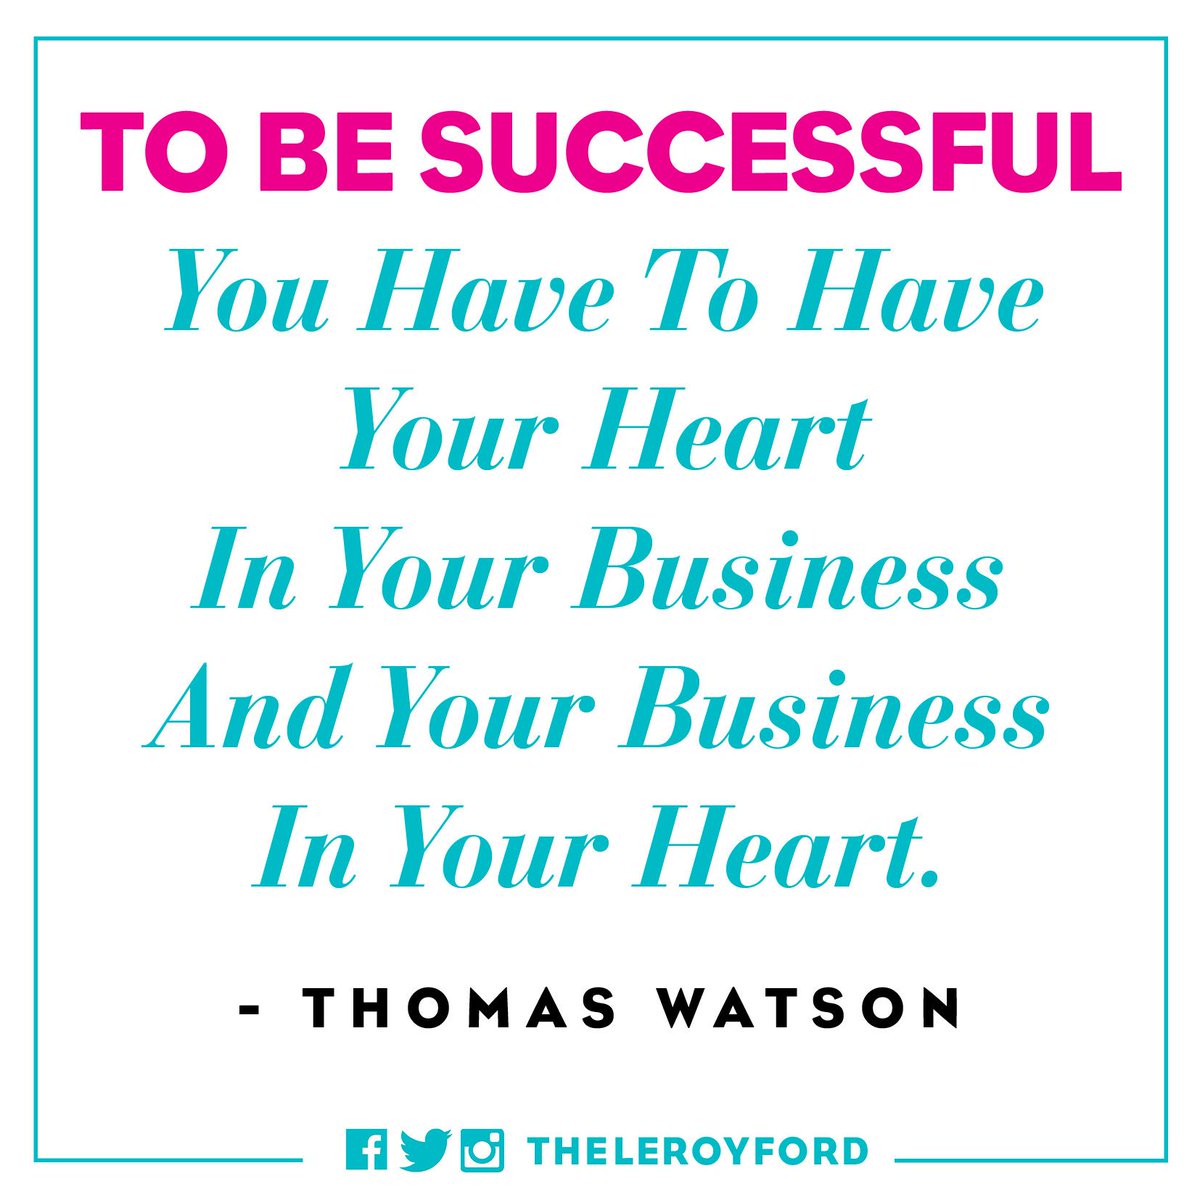 Have your heart in your business, and your business in your heart!
.
#PassionBusiness #Success #entrepreneur